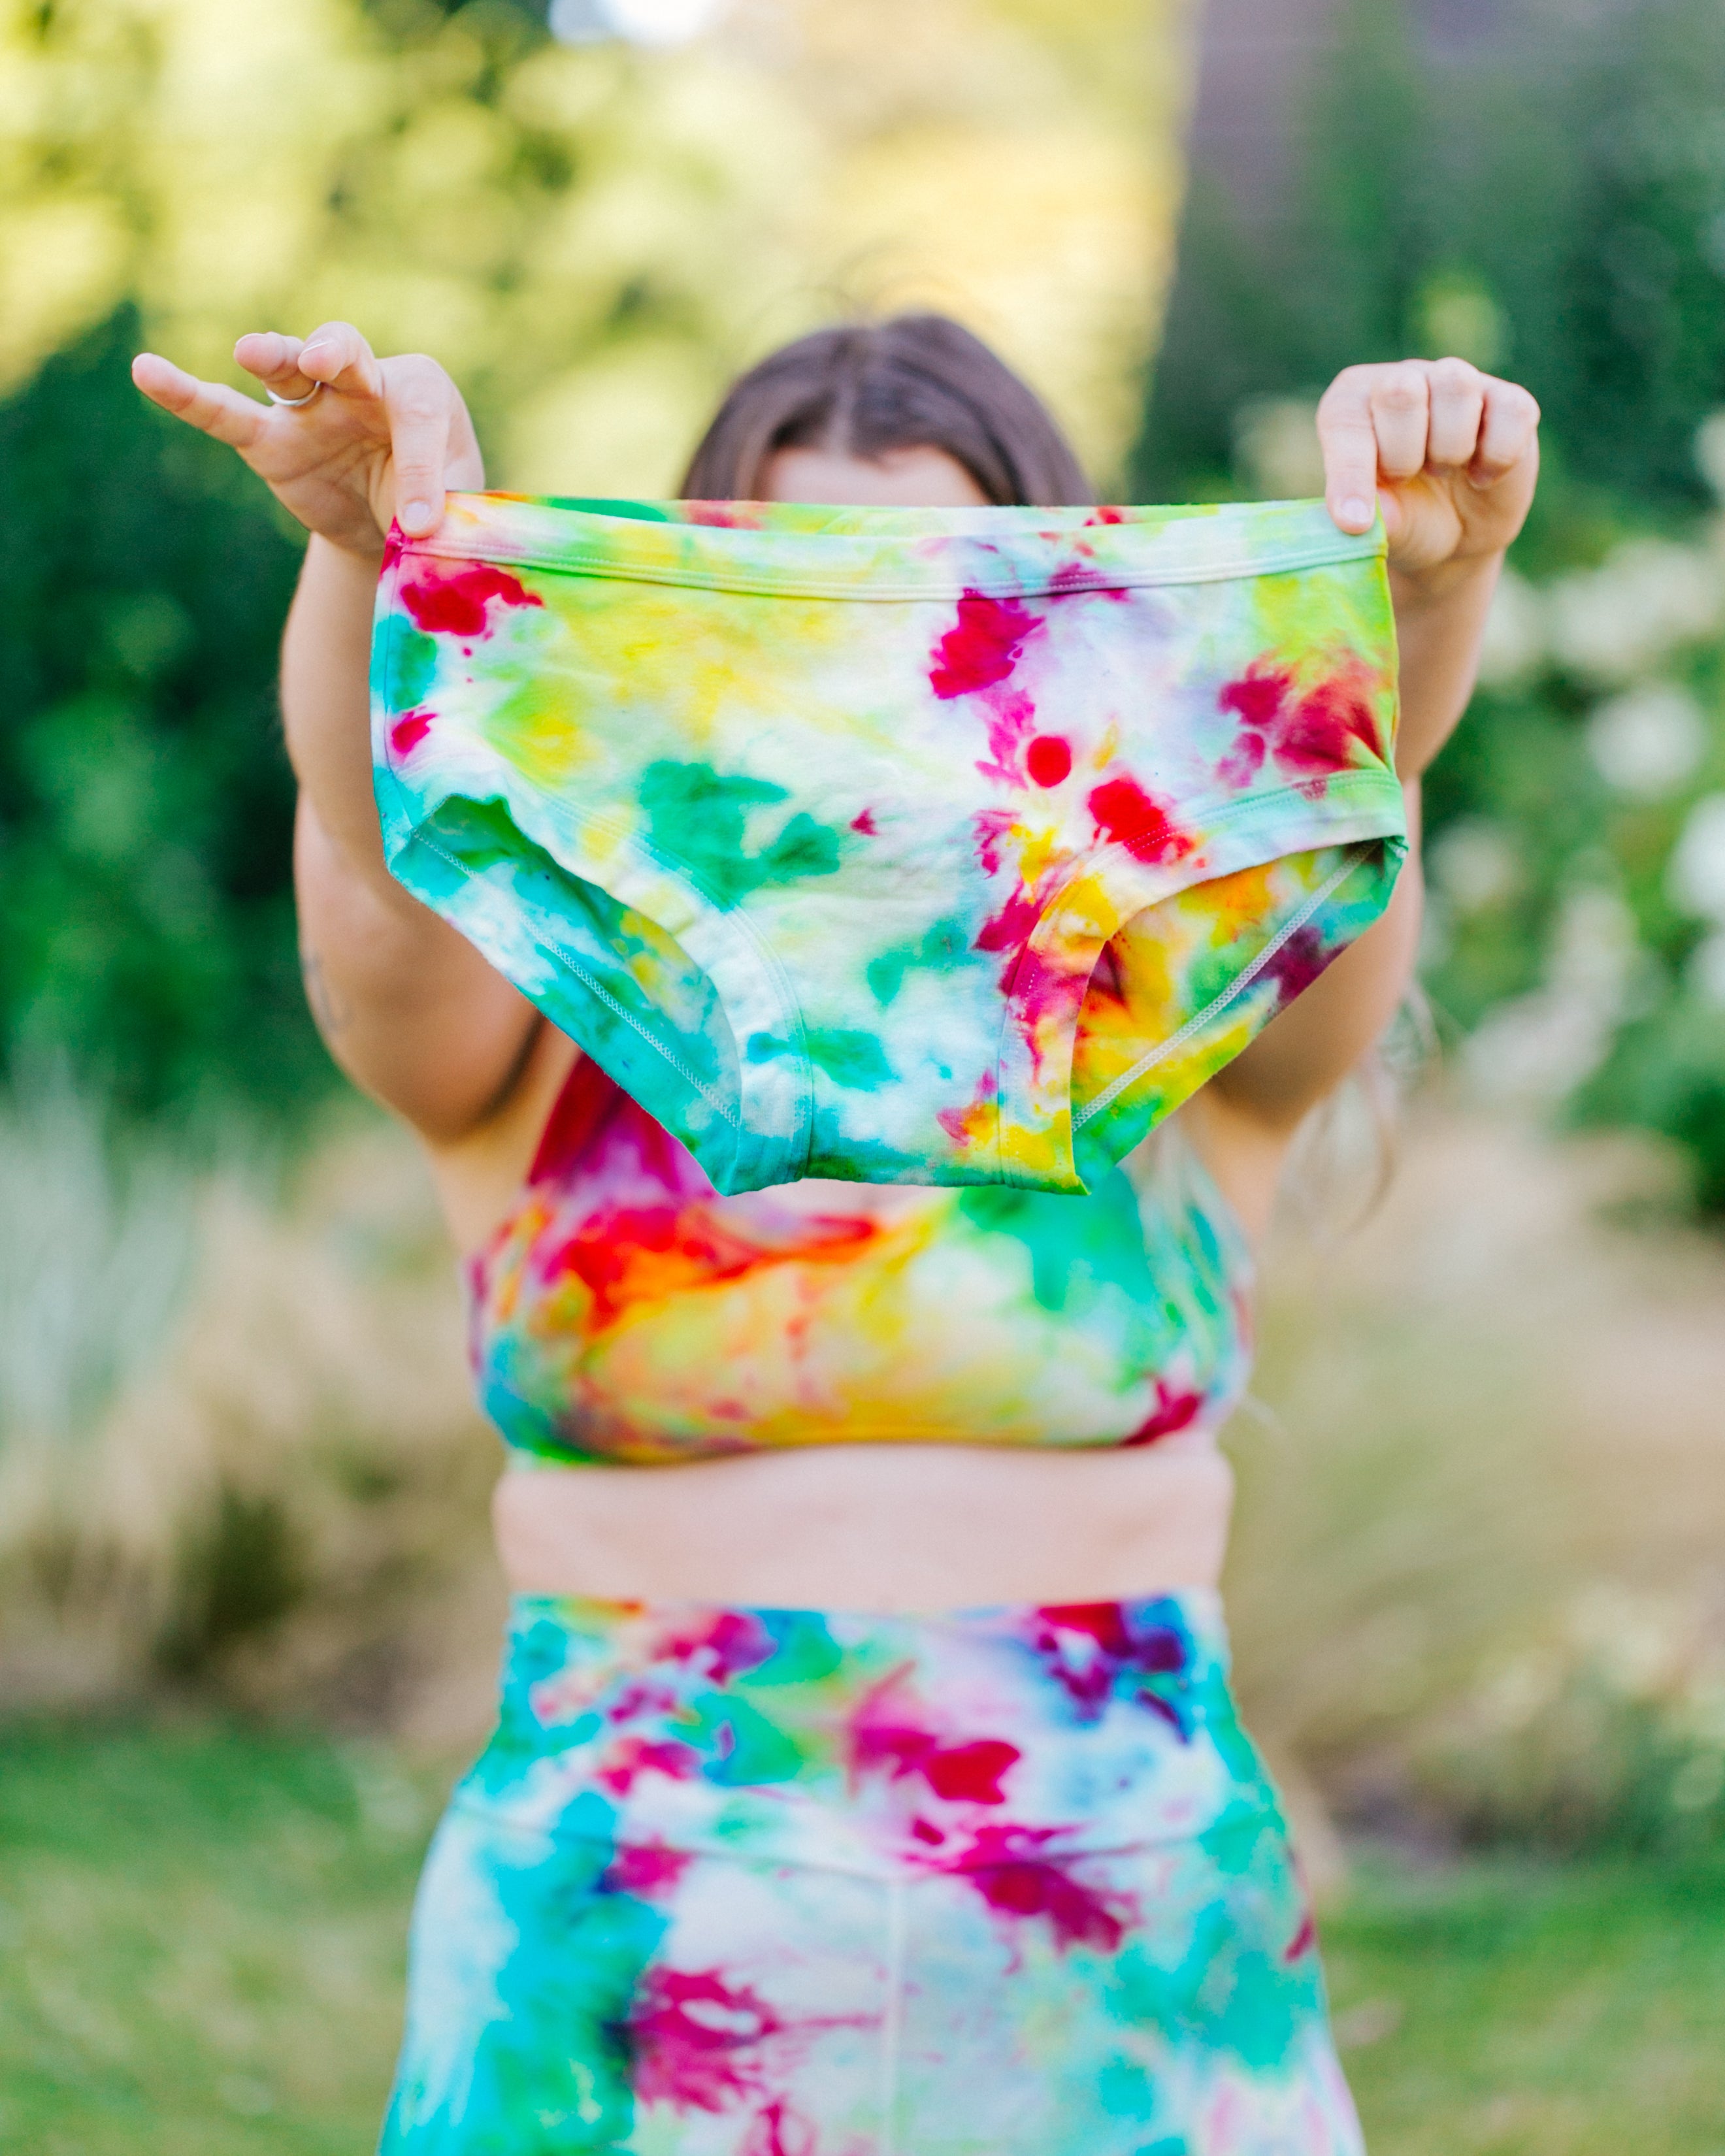 Model wearing ice Dyed Bralette and Bike Shorts holding up Ice Dyed Hipster style underwear in a mix of pink, green, and yellow colors.